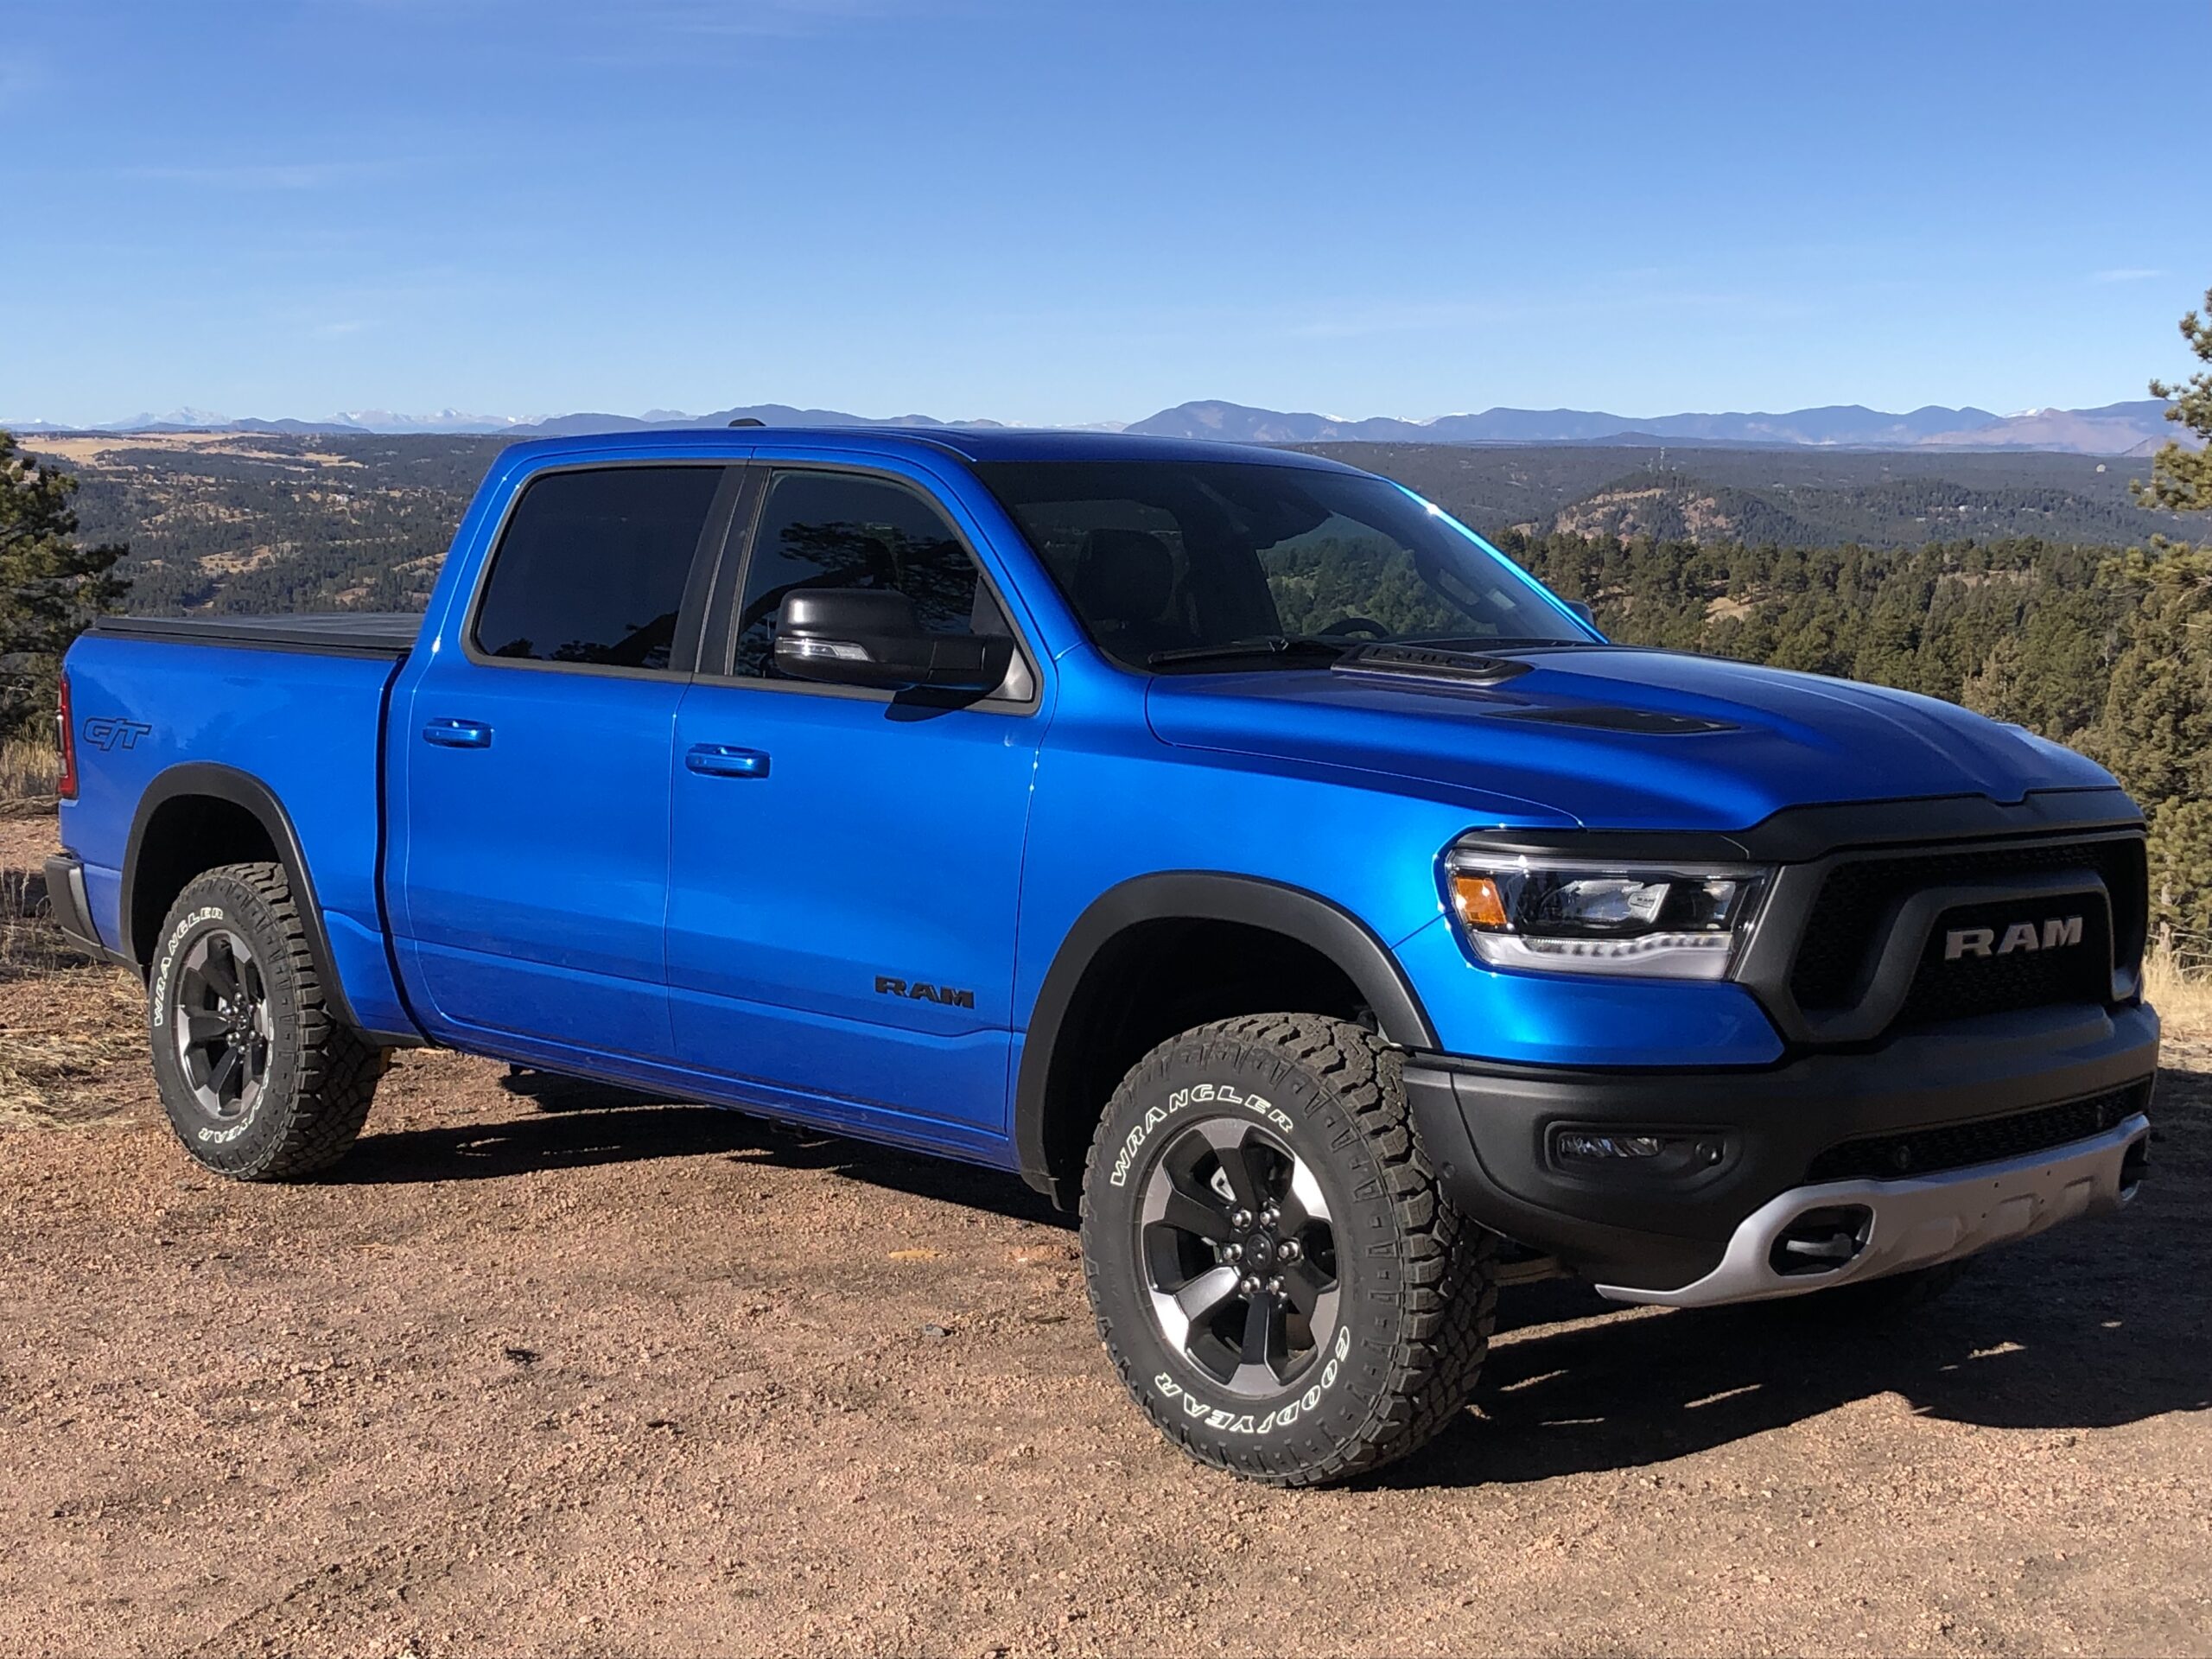 Check Out These Safety Features You Get With the RAM 1500 - Blue